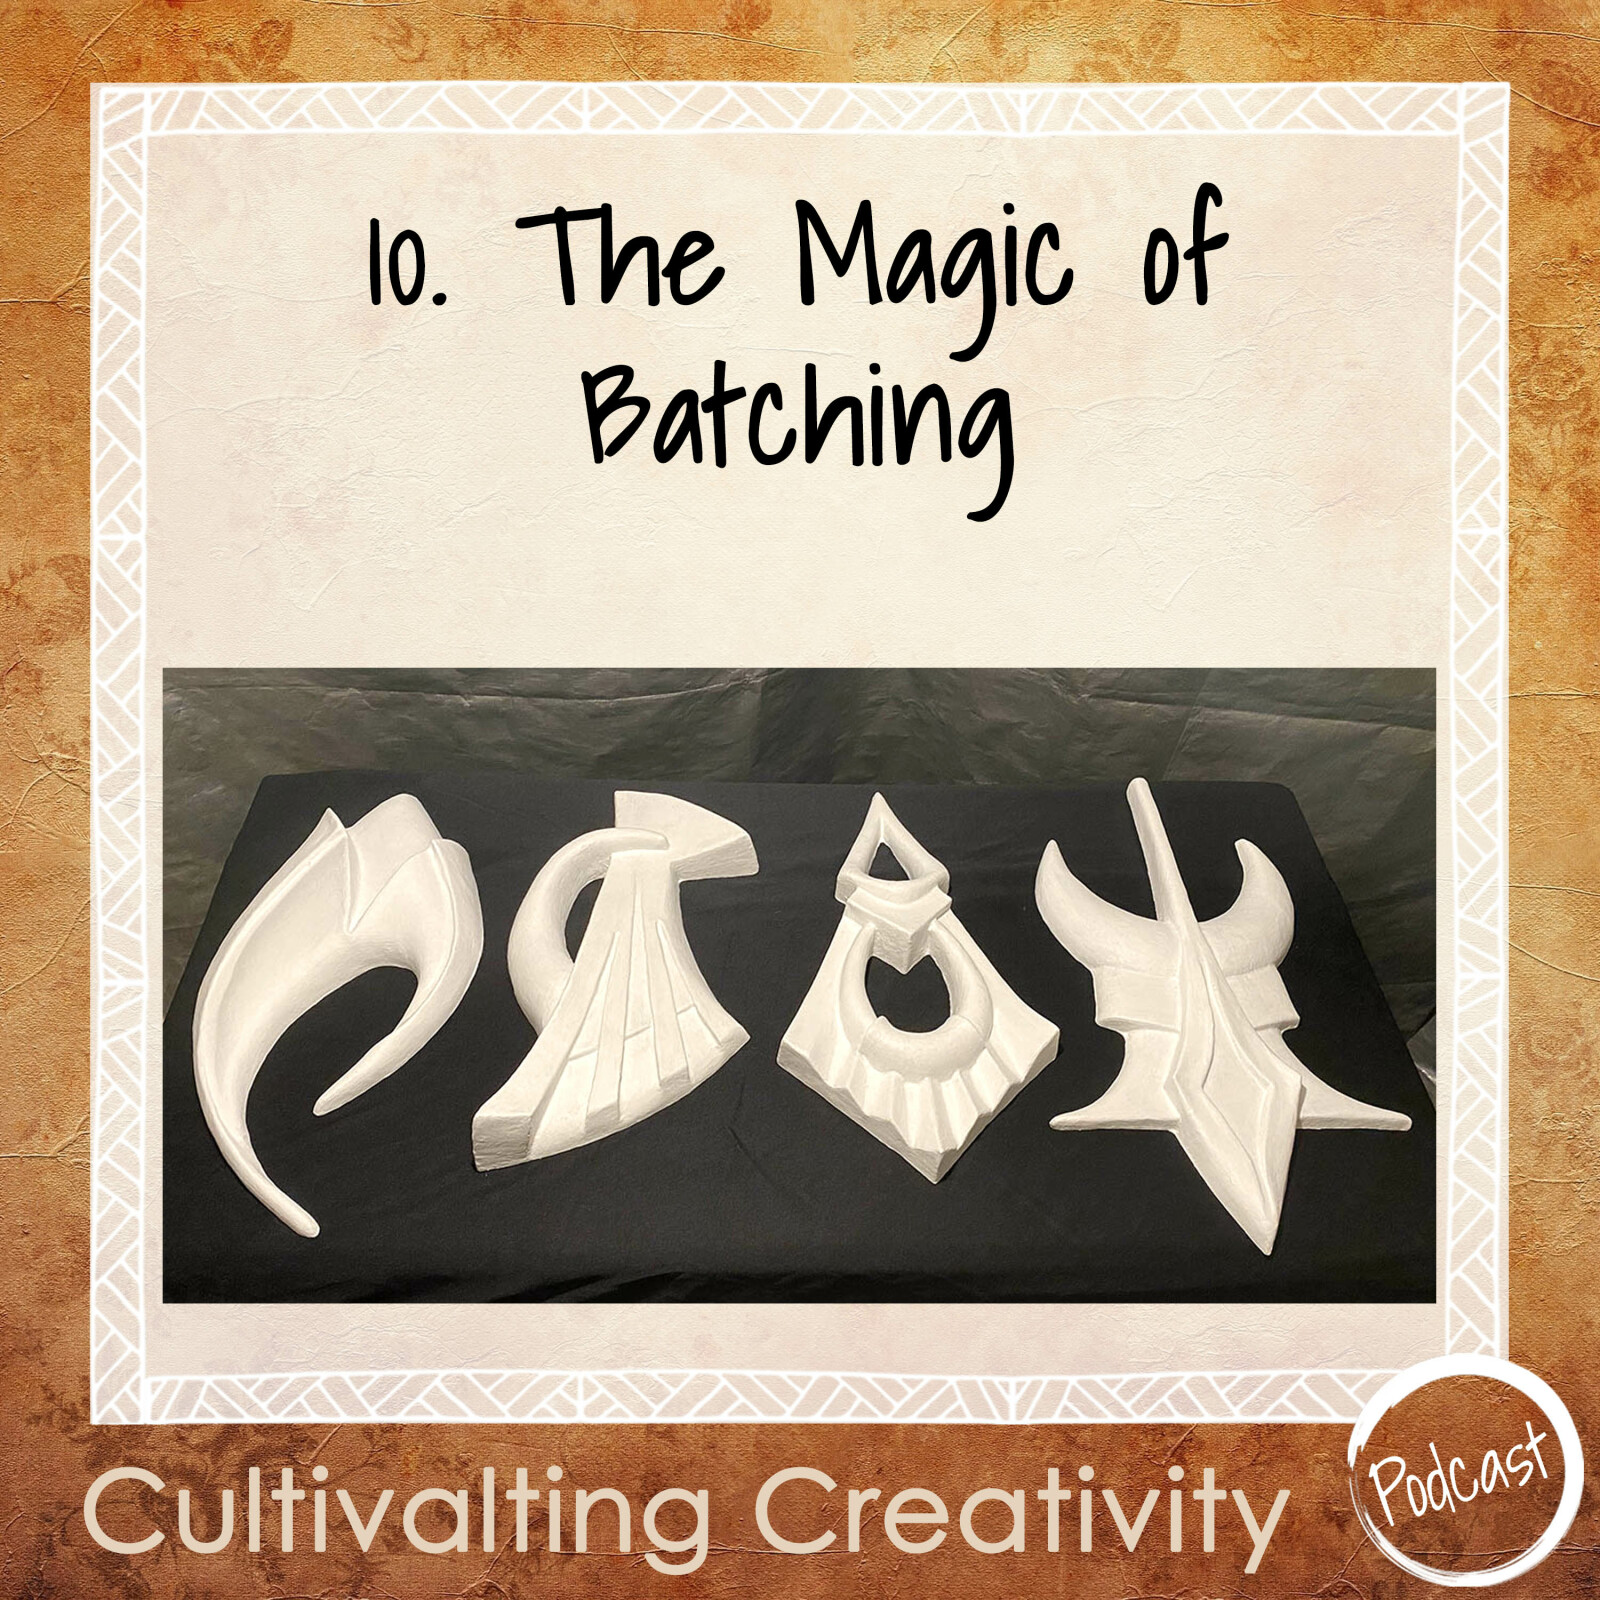 10. The Magic of Batching